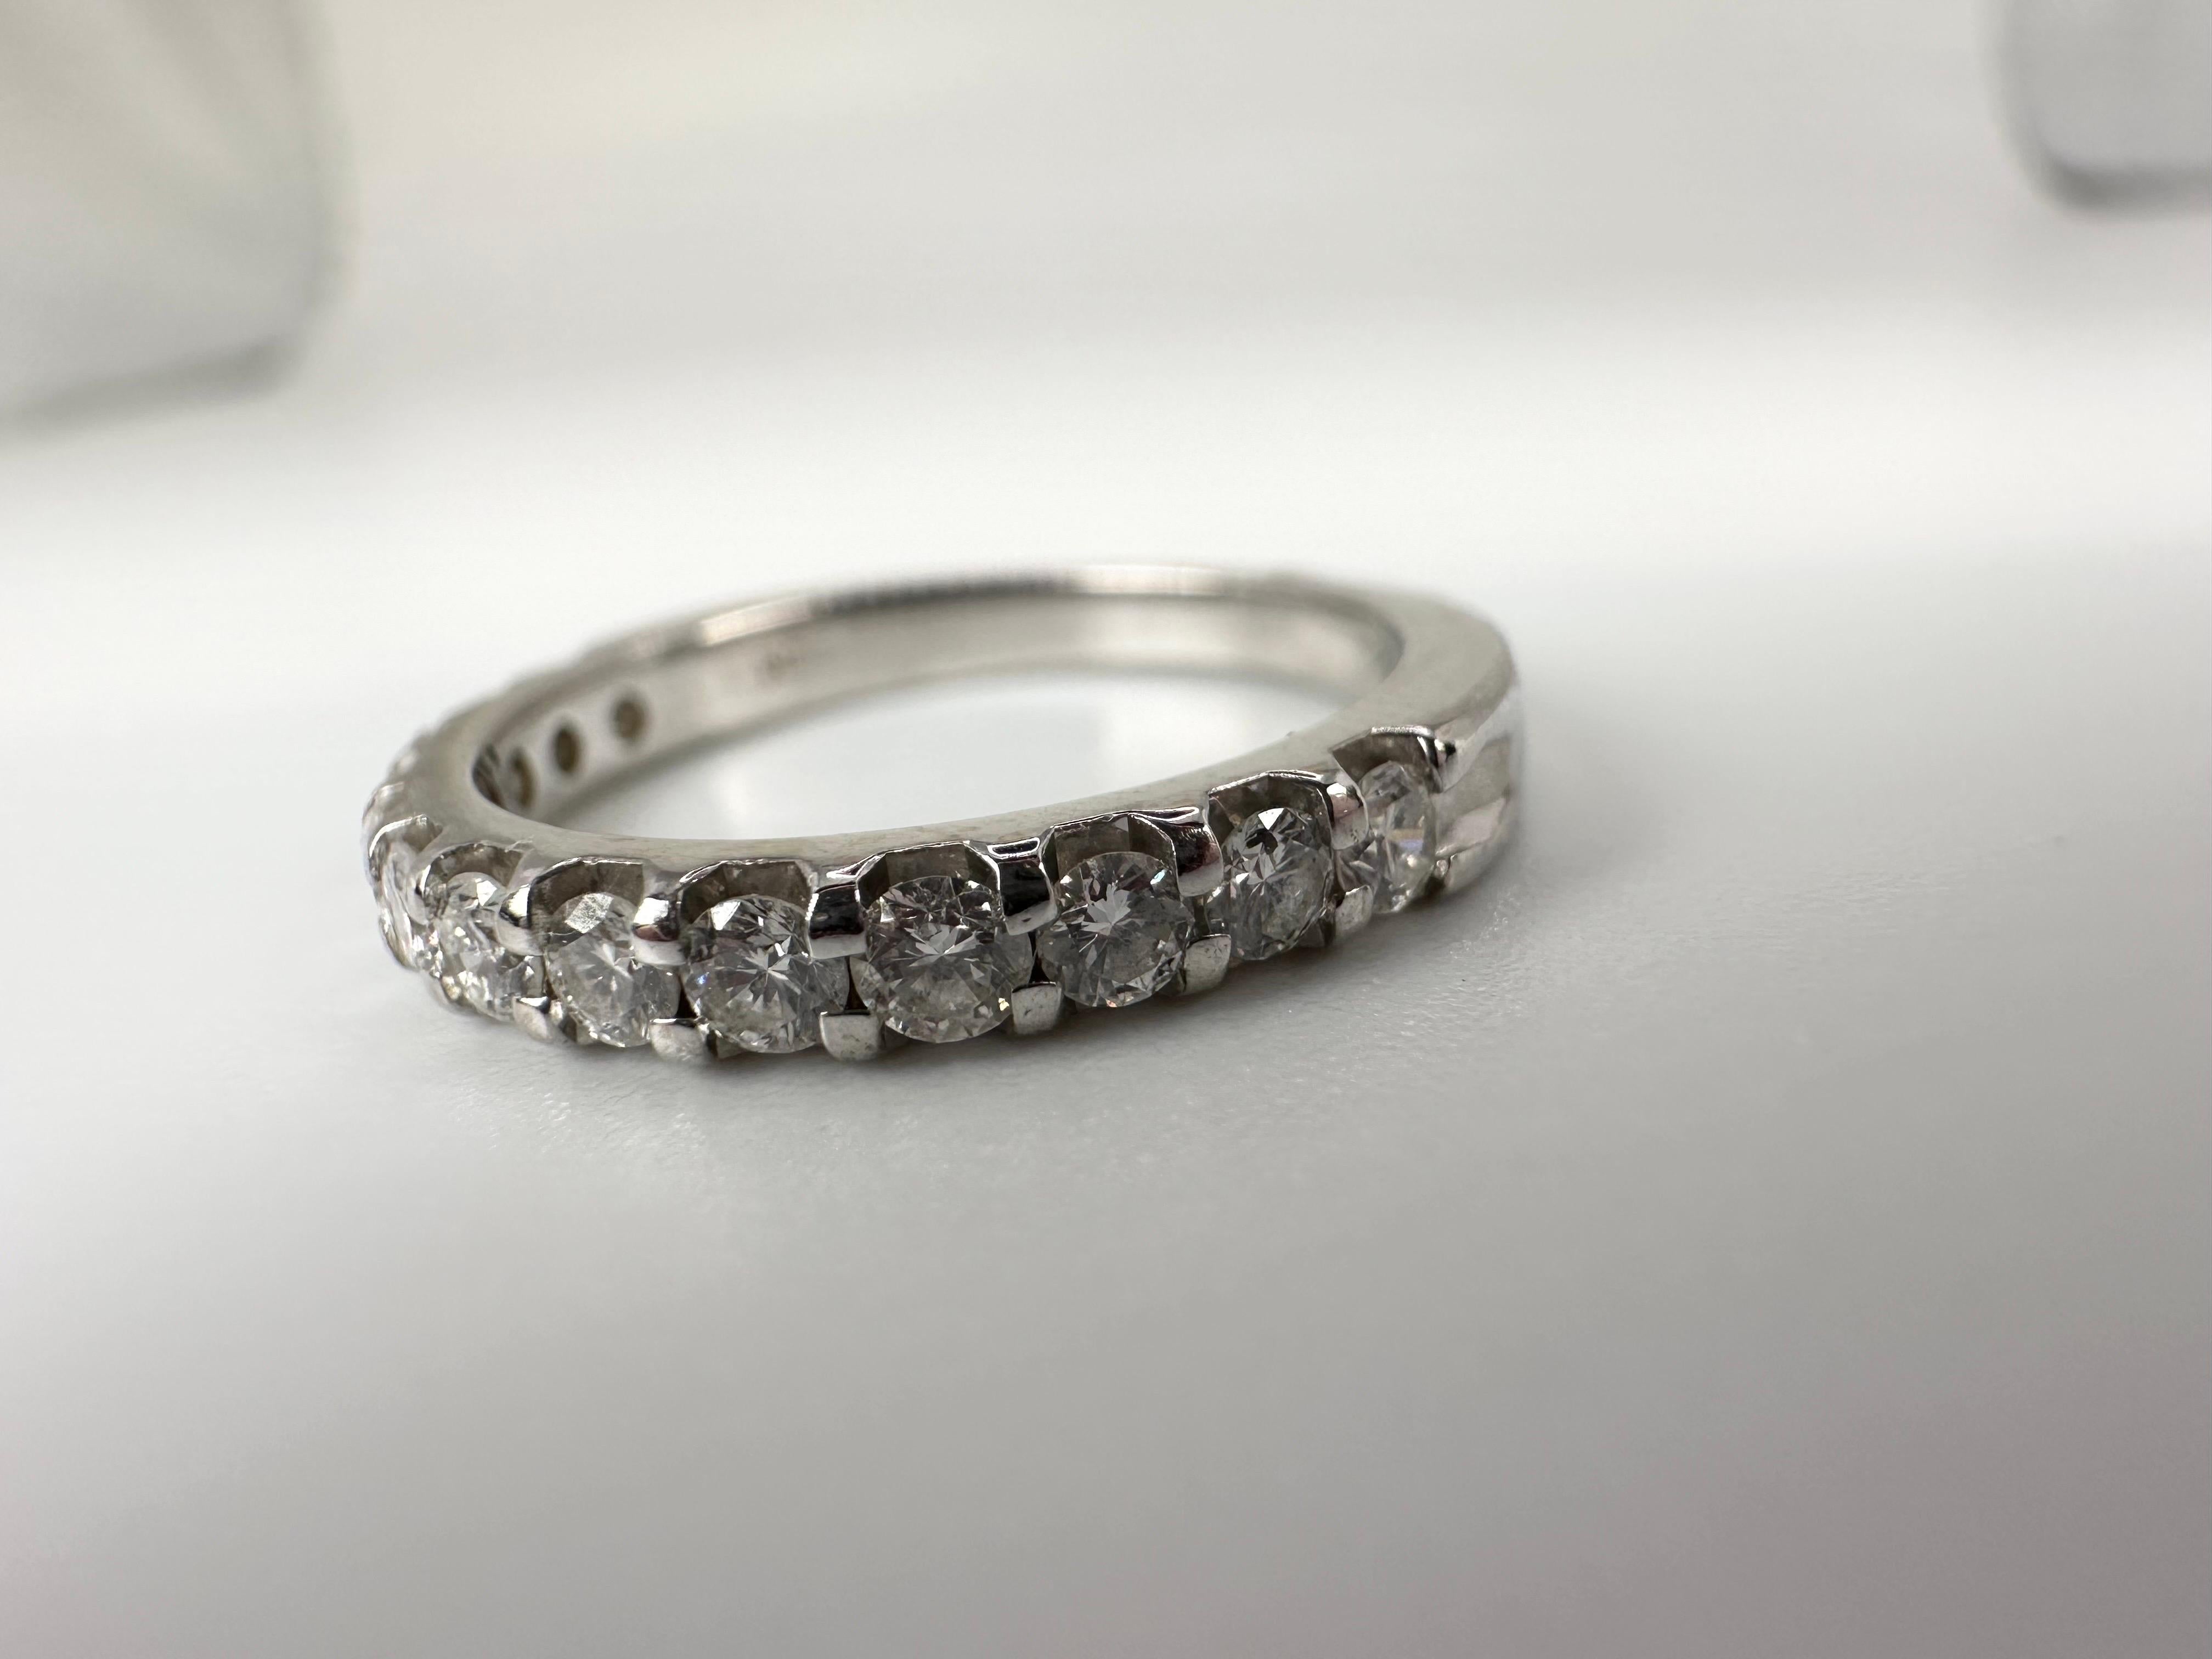 Half eternity style diamond ring in 14KT white gold!

GOLD: 14KT gold
NATURAL DIAMOND(S)
Clarity/Color: VS/H
Carat:0.40ct
Cut:Round Brilliant
Grams:2.48
size: 4.75
Item#: 110-00045EEI

WHAT YOU GET AT STAMPAR JEWELERS:
Stampar Jewelers, located in